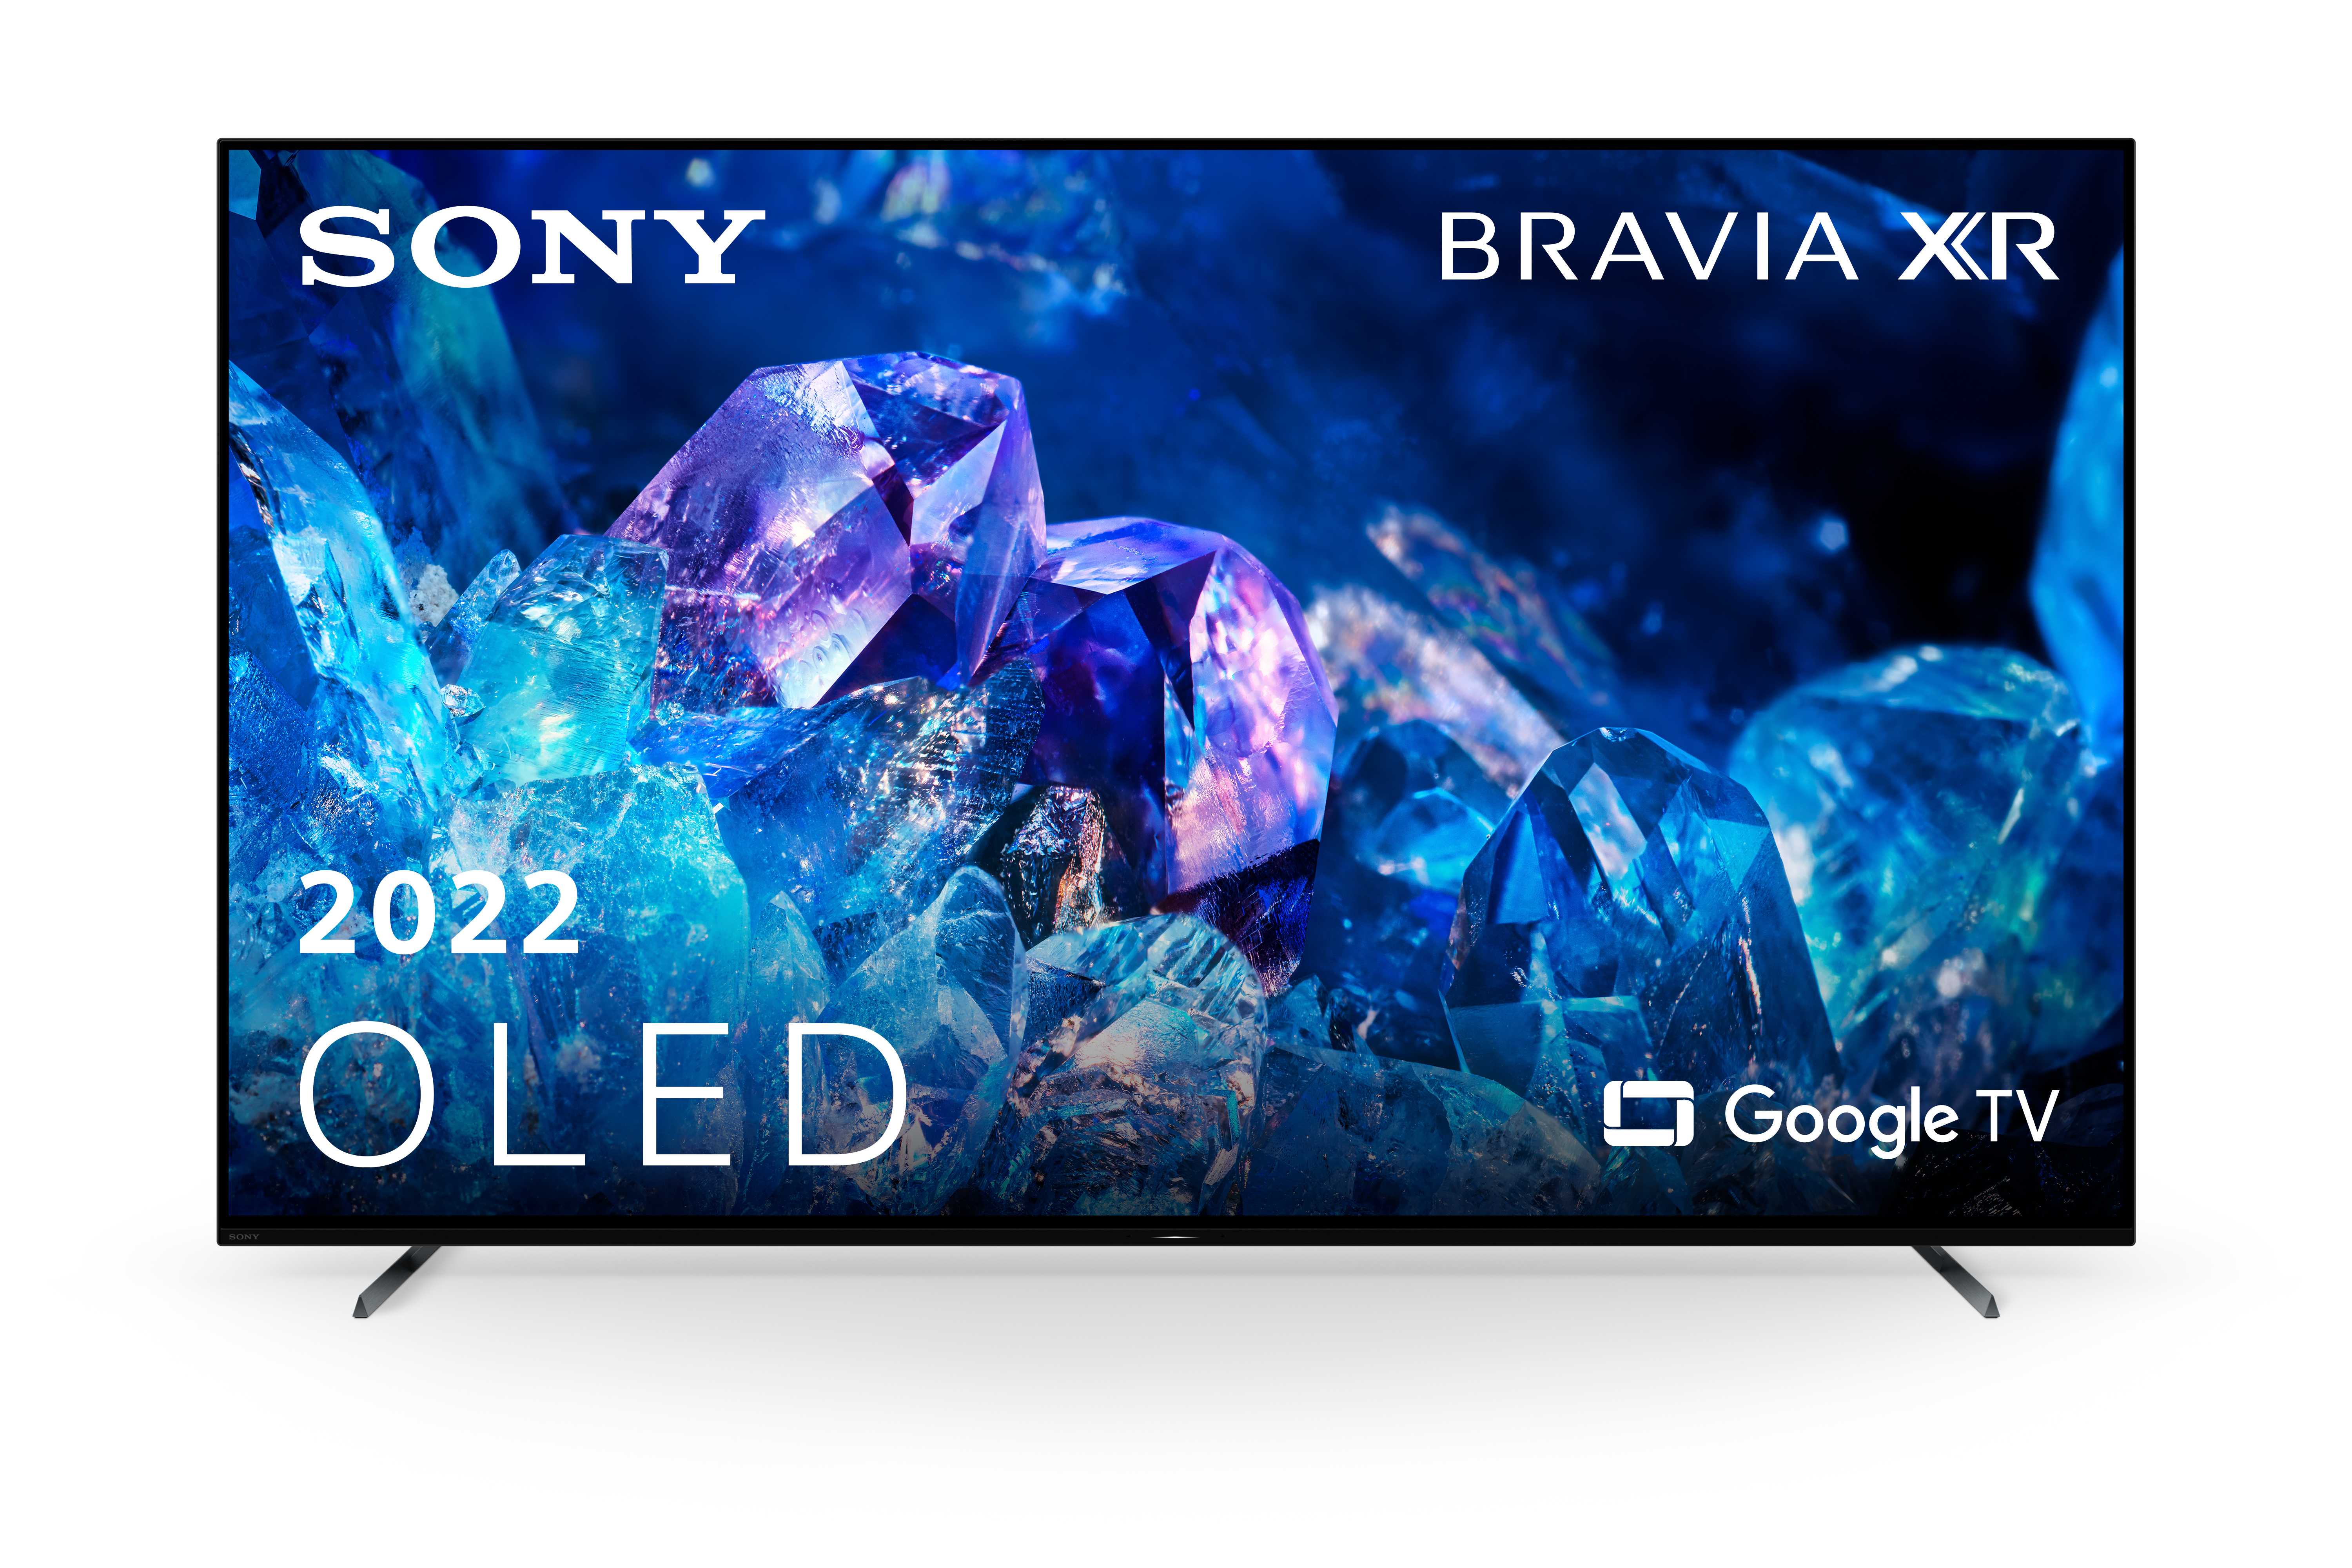 XR55A80K | 55" Class A80K 4K HDR OLED TV with Google TV (2022)